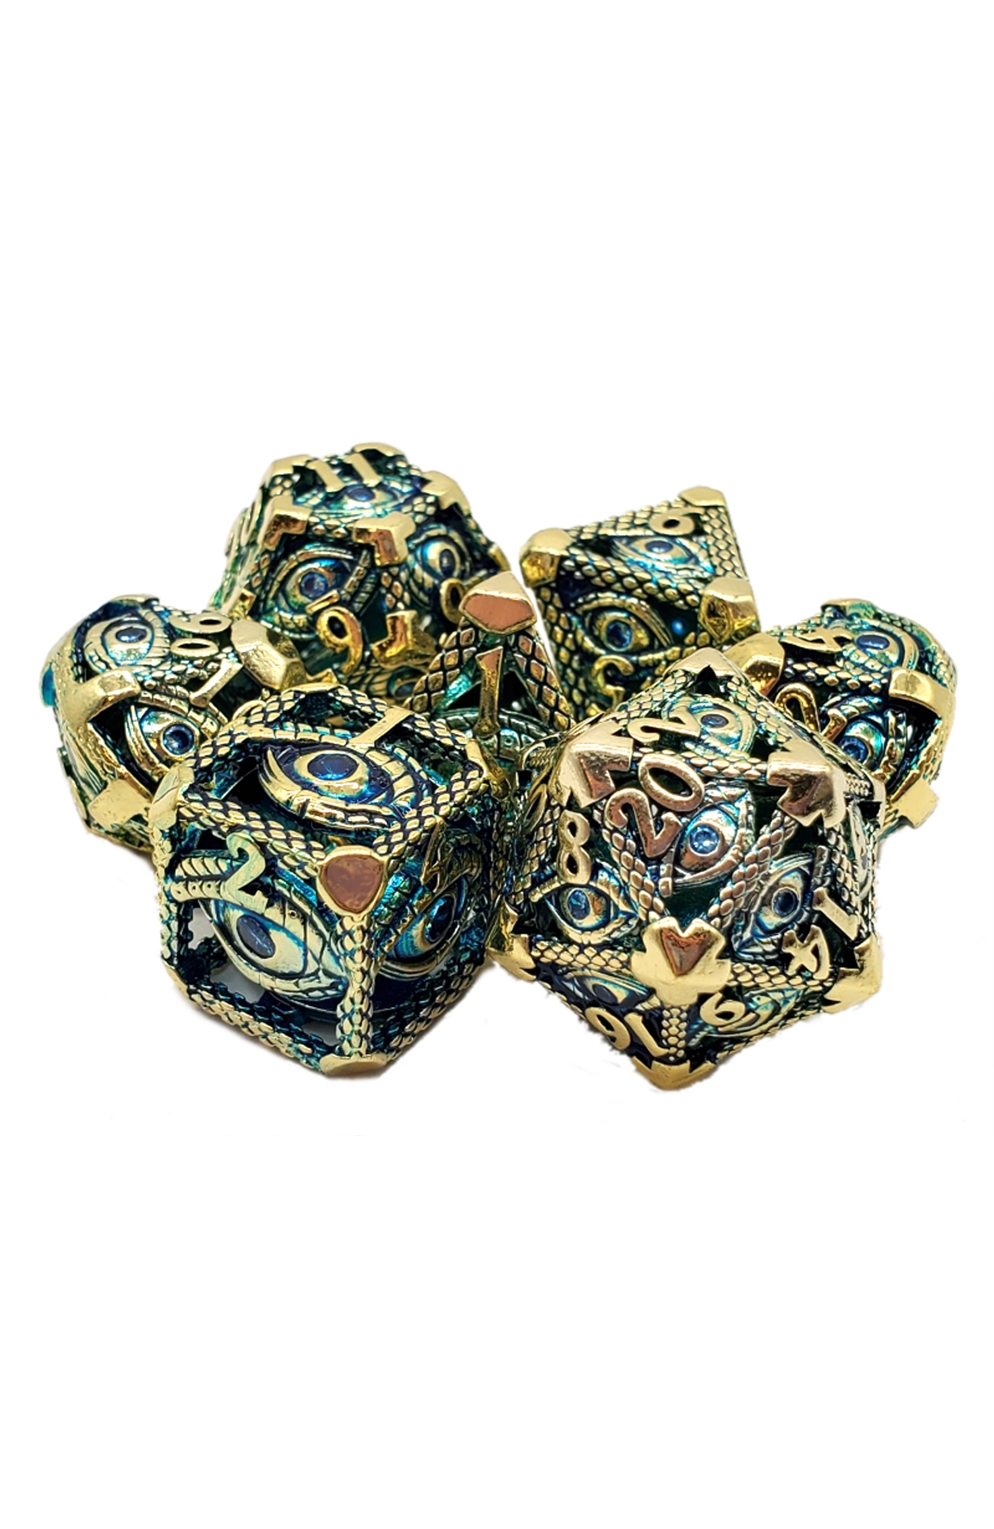 Old School 7 Piece Dnd Rpg Metal Dice Set: Hollow All Seeing Eye Dice - Gold W/ Blue